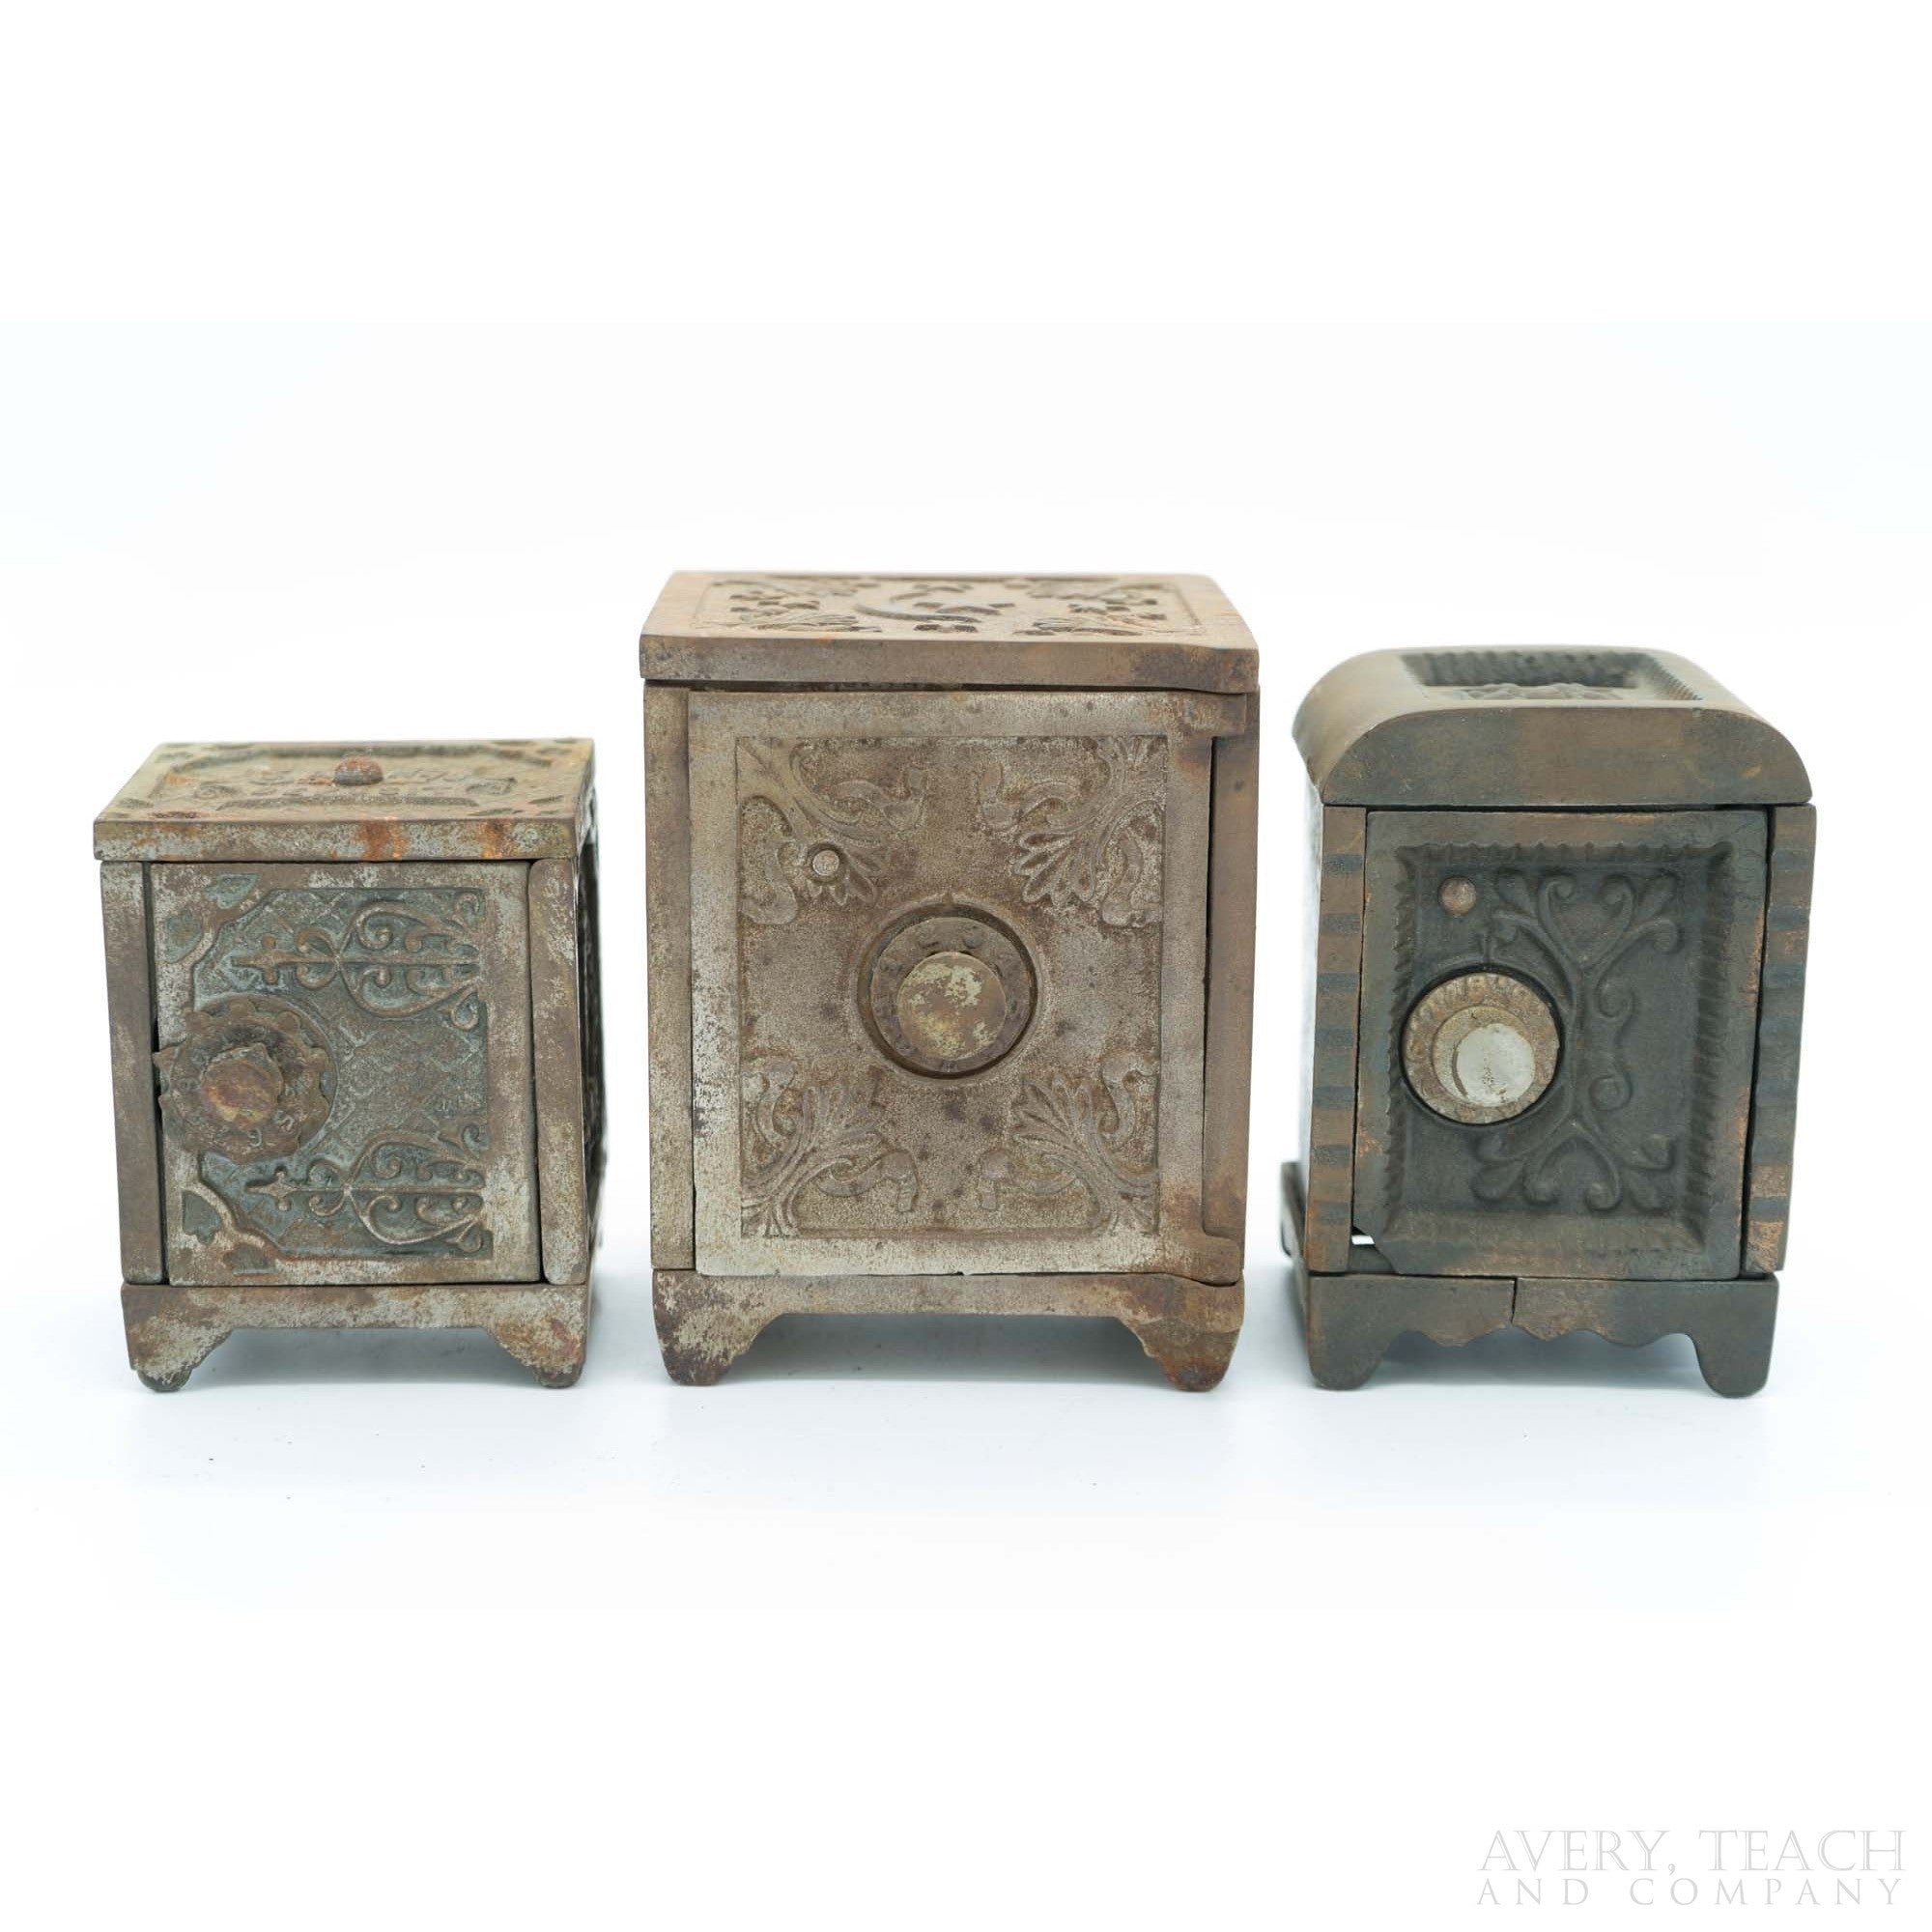 Lot of 3 Cast Iron Combination Banks - Avery, Teach and Co.